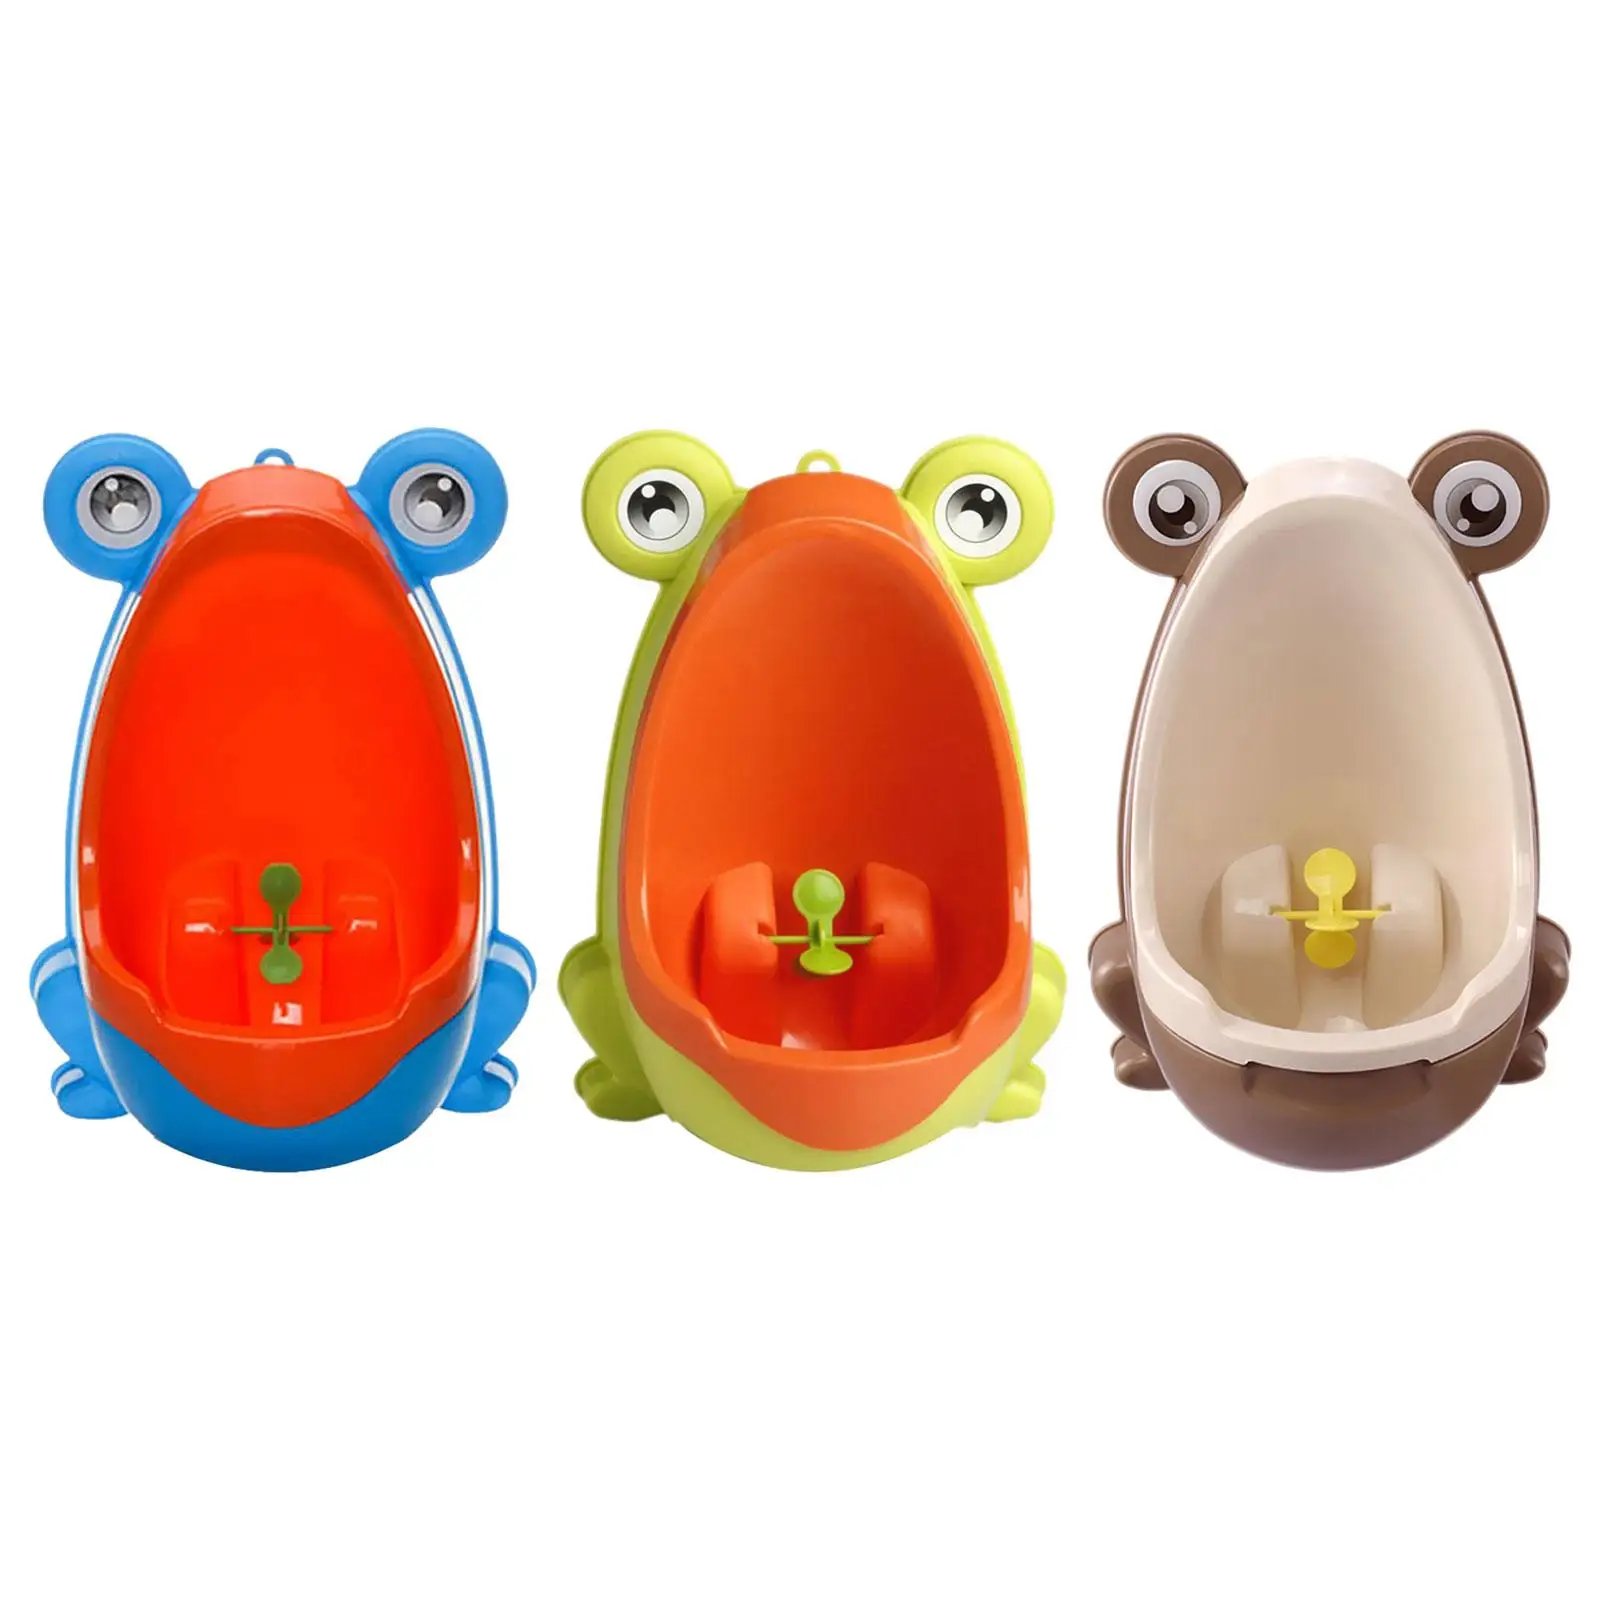 Boy Toilet Training Adjustable Height with Target Cartton Frog Potty Trainer Urinal for Indoor Outdoor Ages 2 and 6 Child